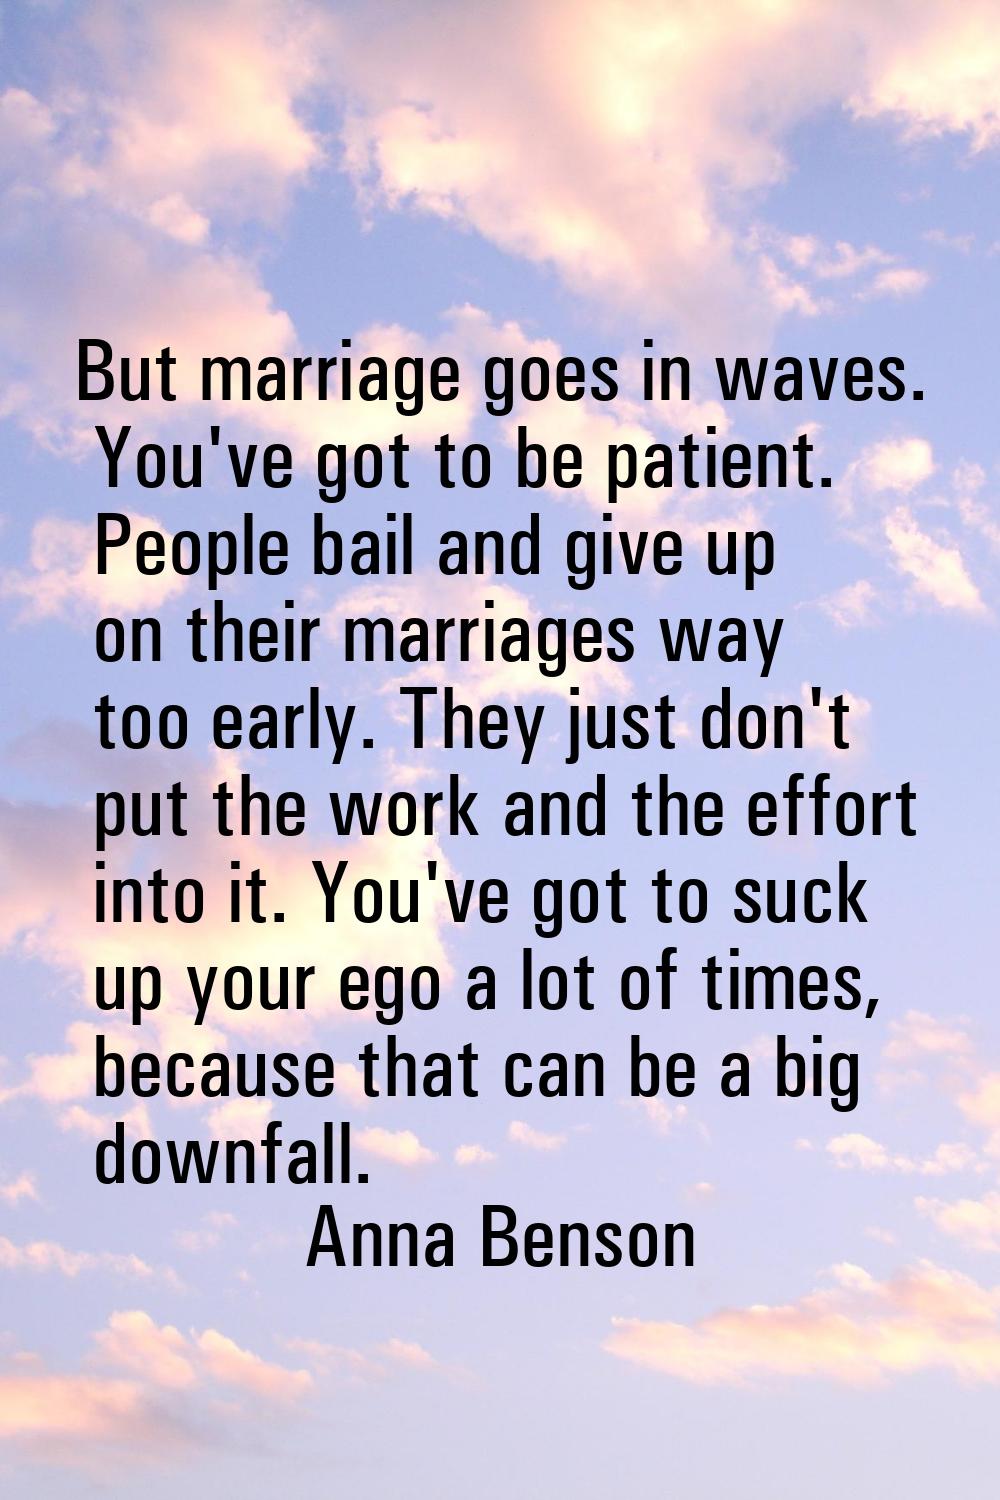 But marriage goes in waves. You've got to be patient. People bail and give up on their marriages wa